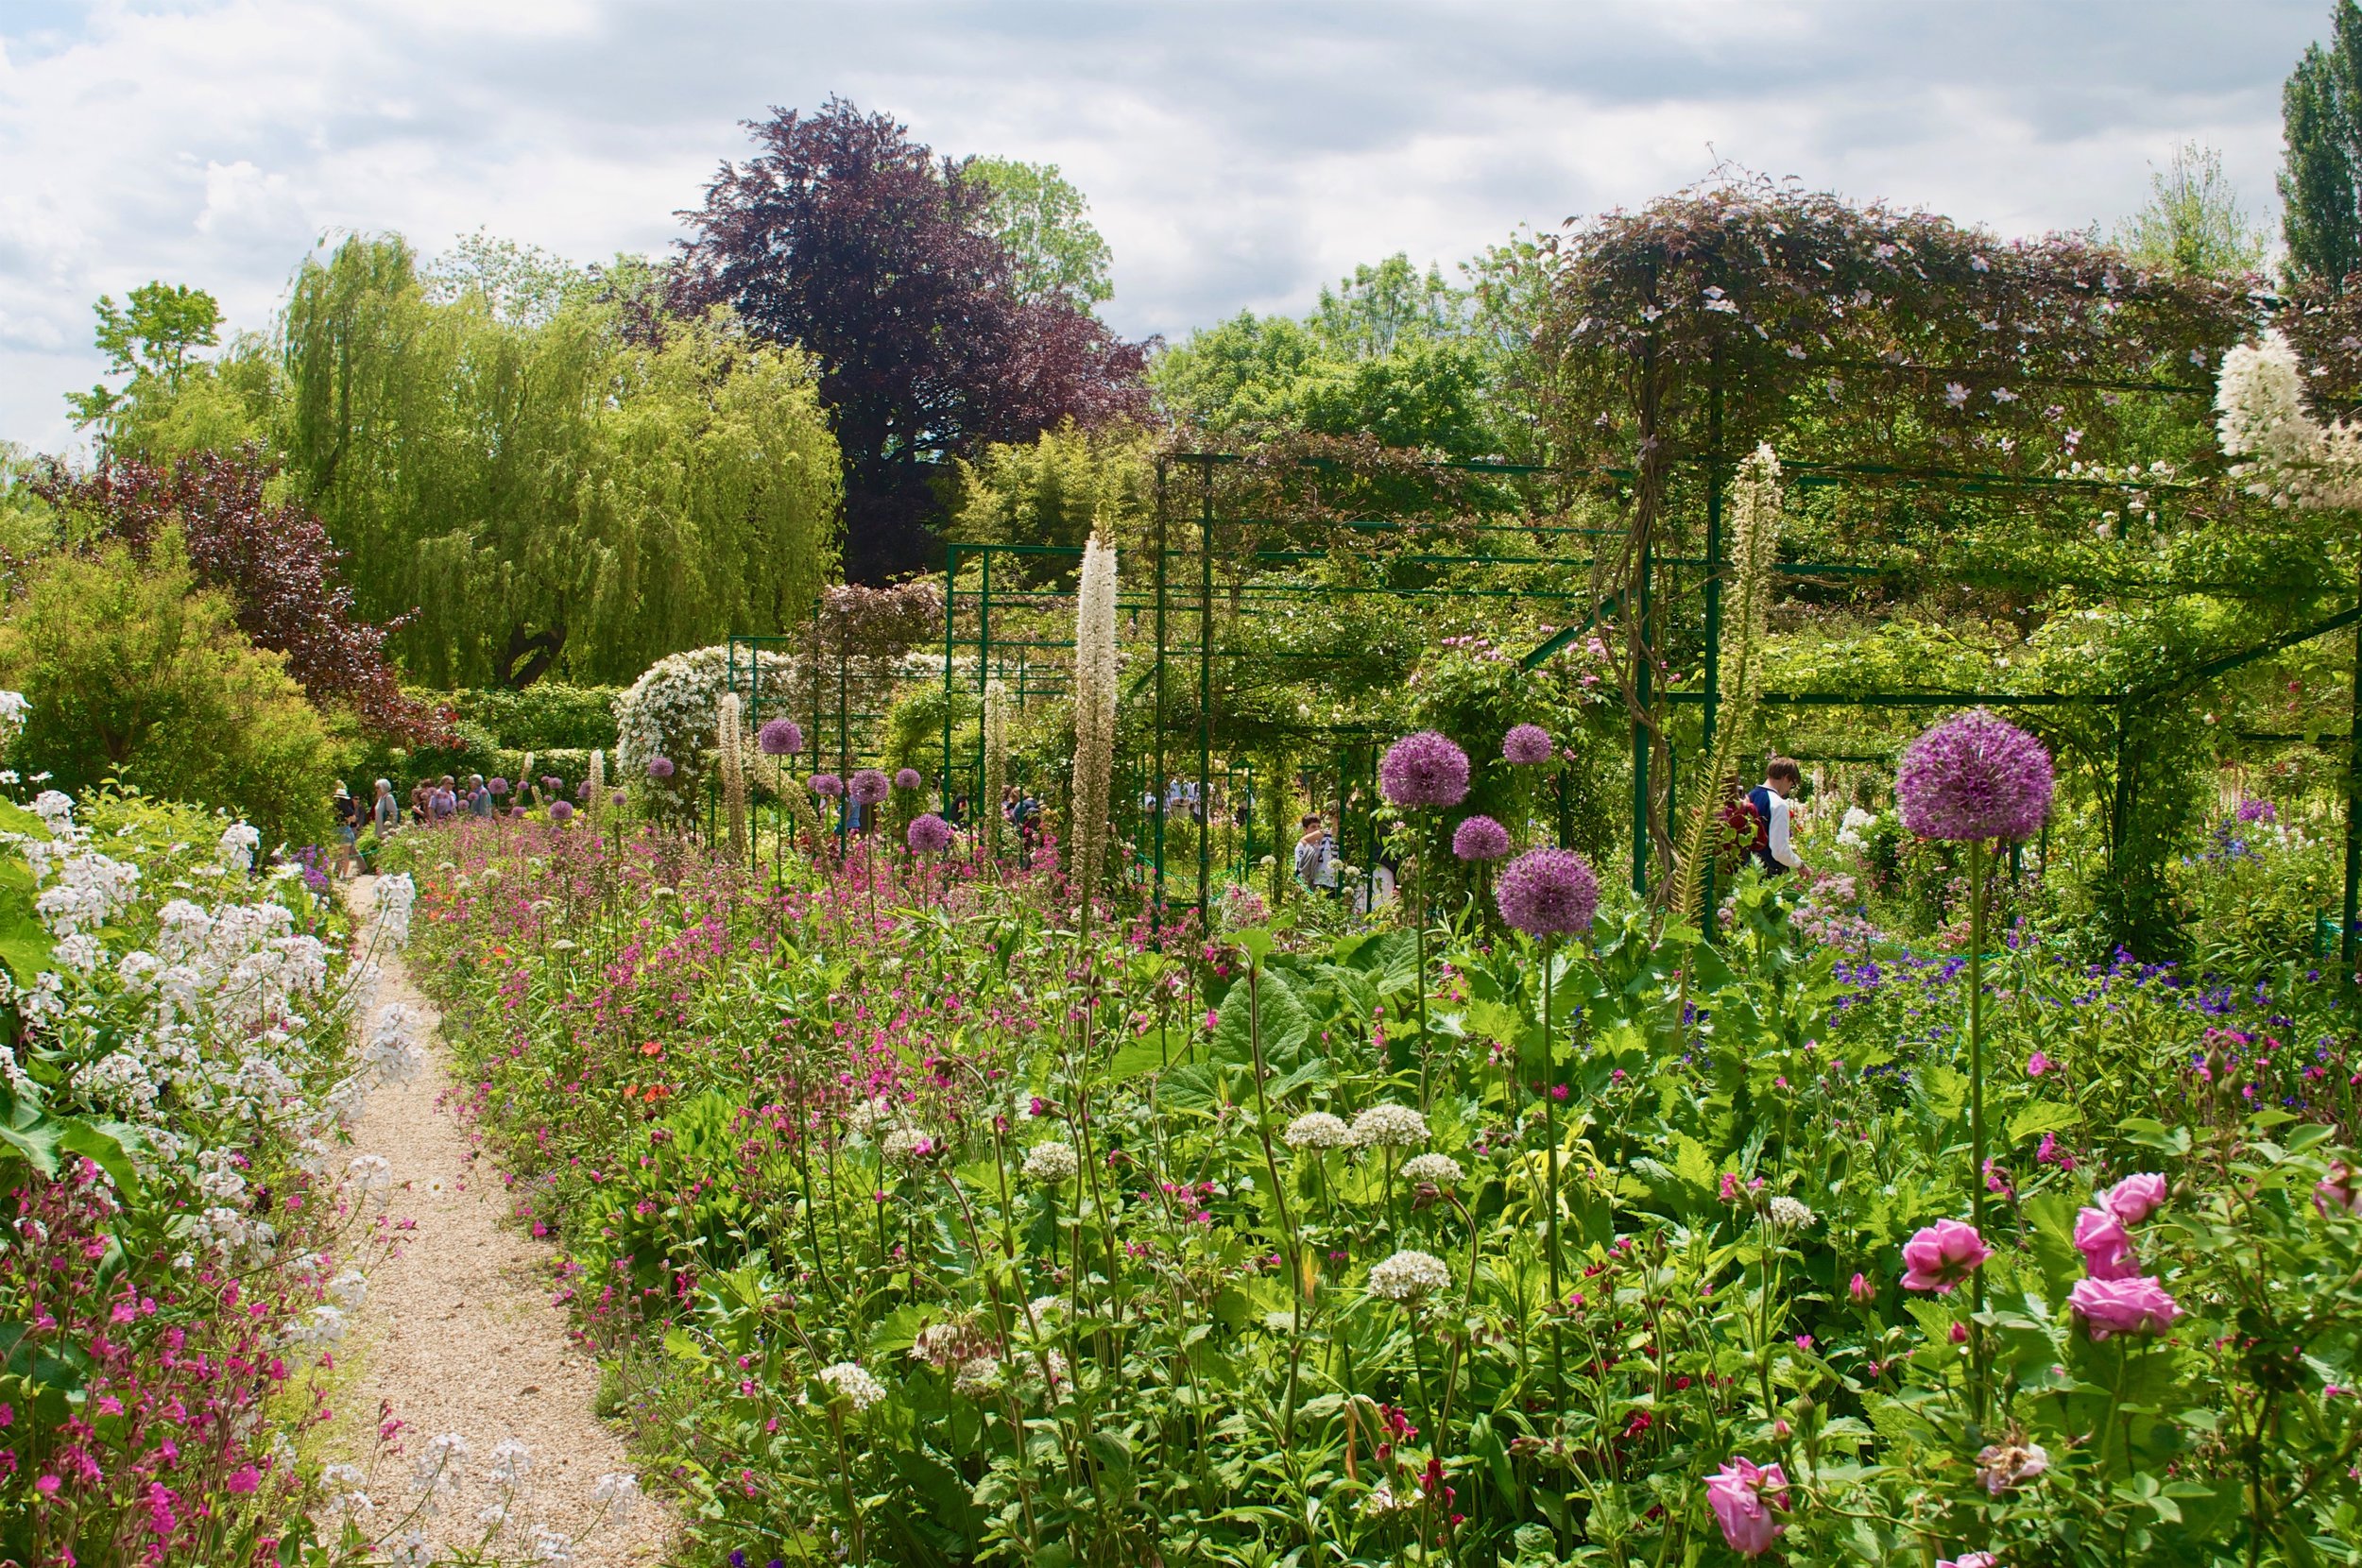 The Ultimate Northern France Itinerary - Giverny, Monet Gardens #monetgardens #giverny #france